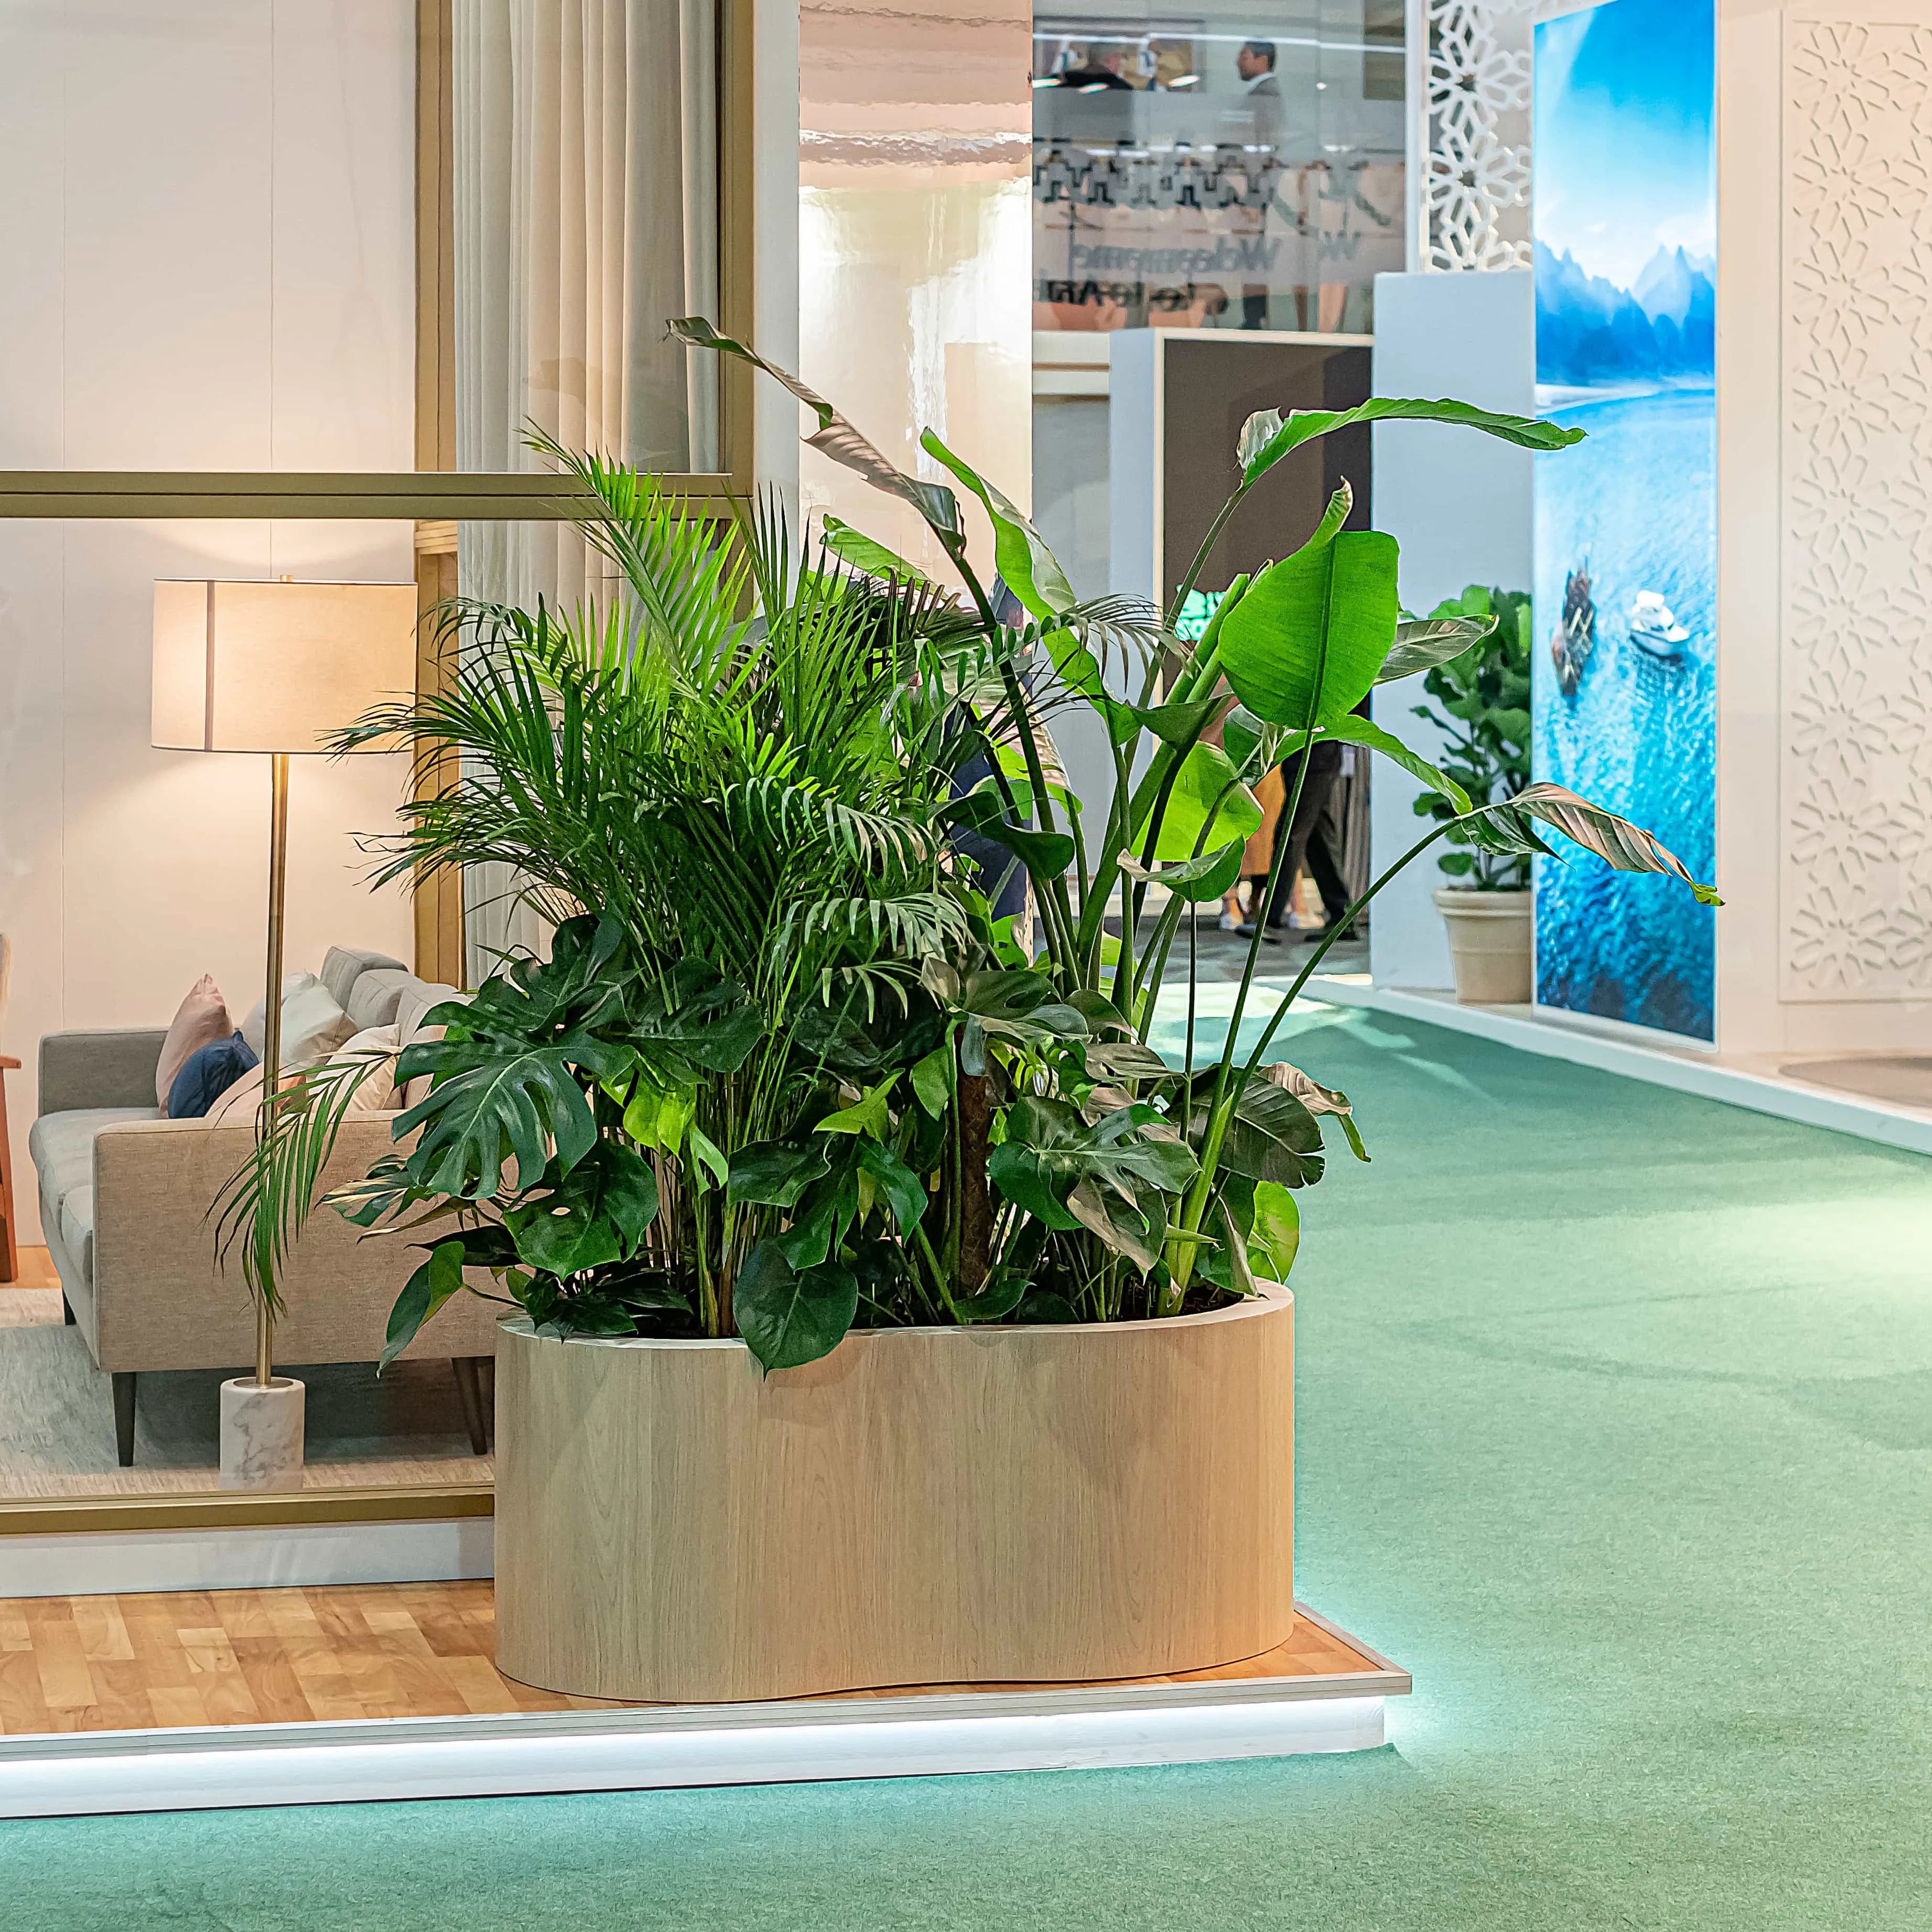 A single plant for hire presented as part of the plant installation for client Red Sea Global who wanted plants to create a natural décor style